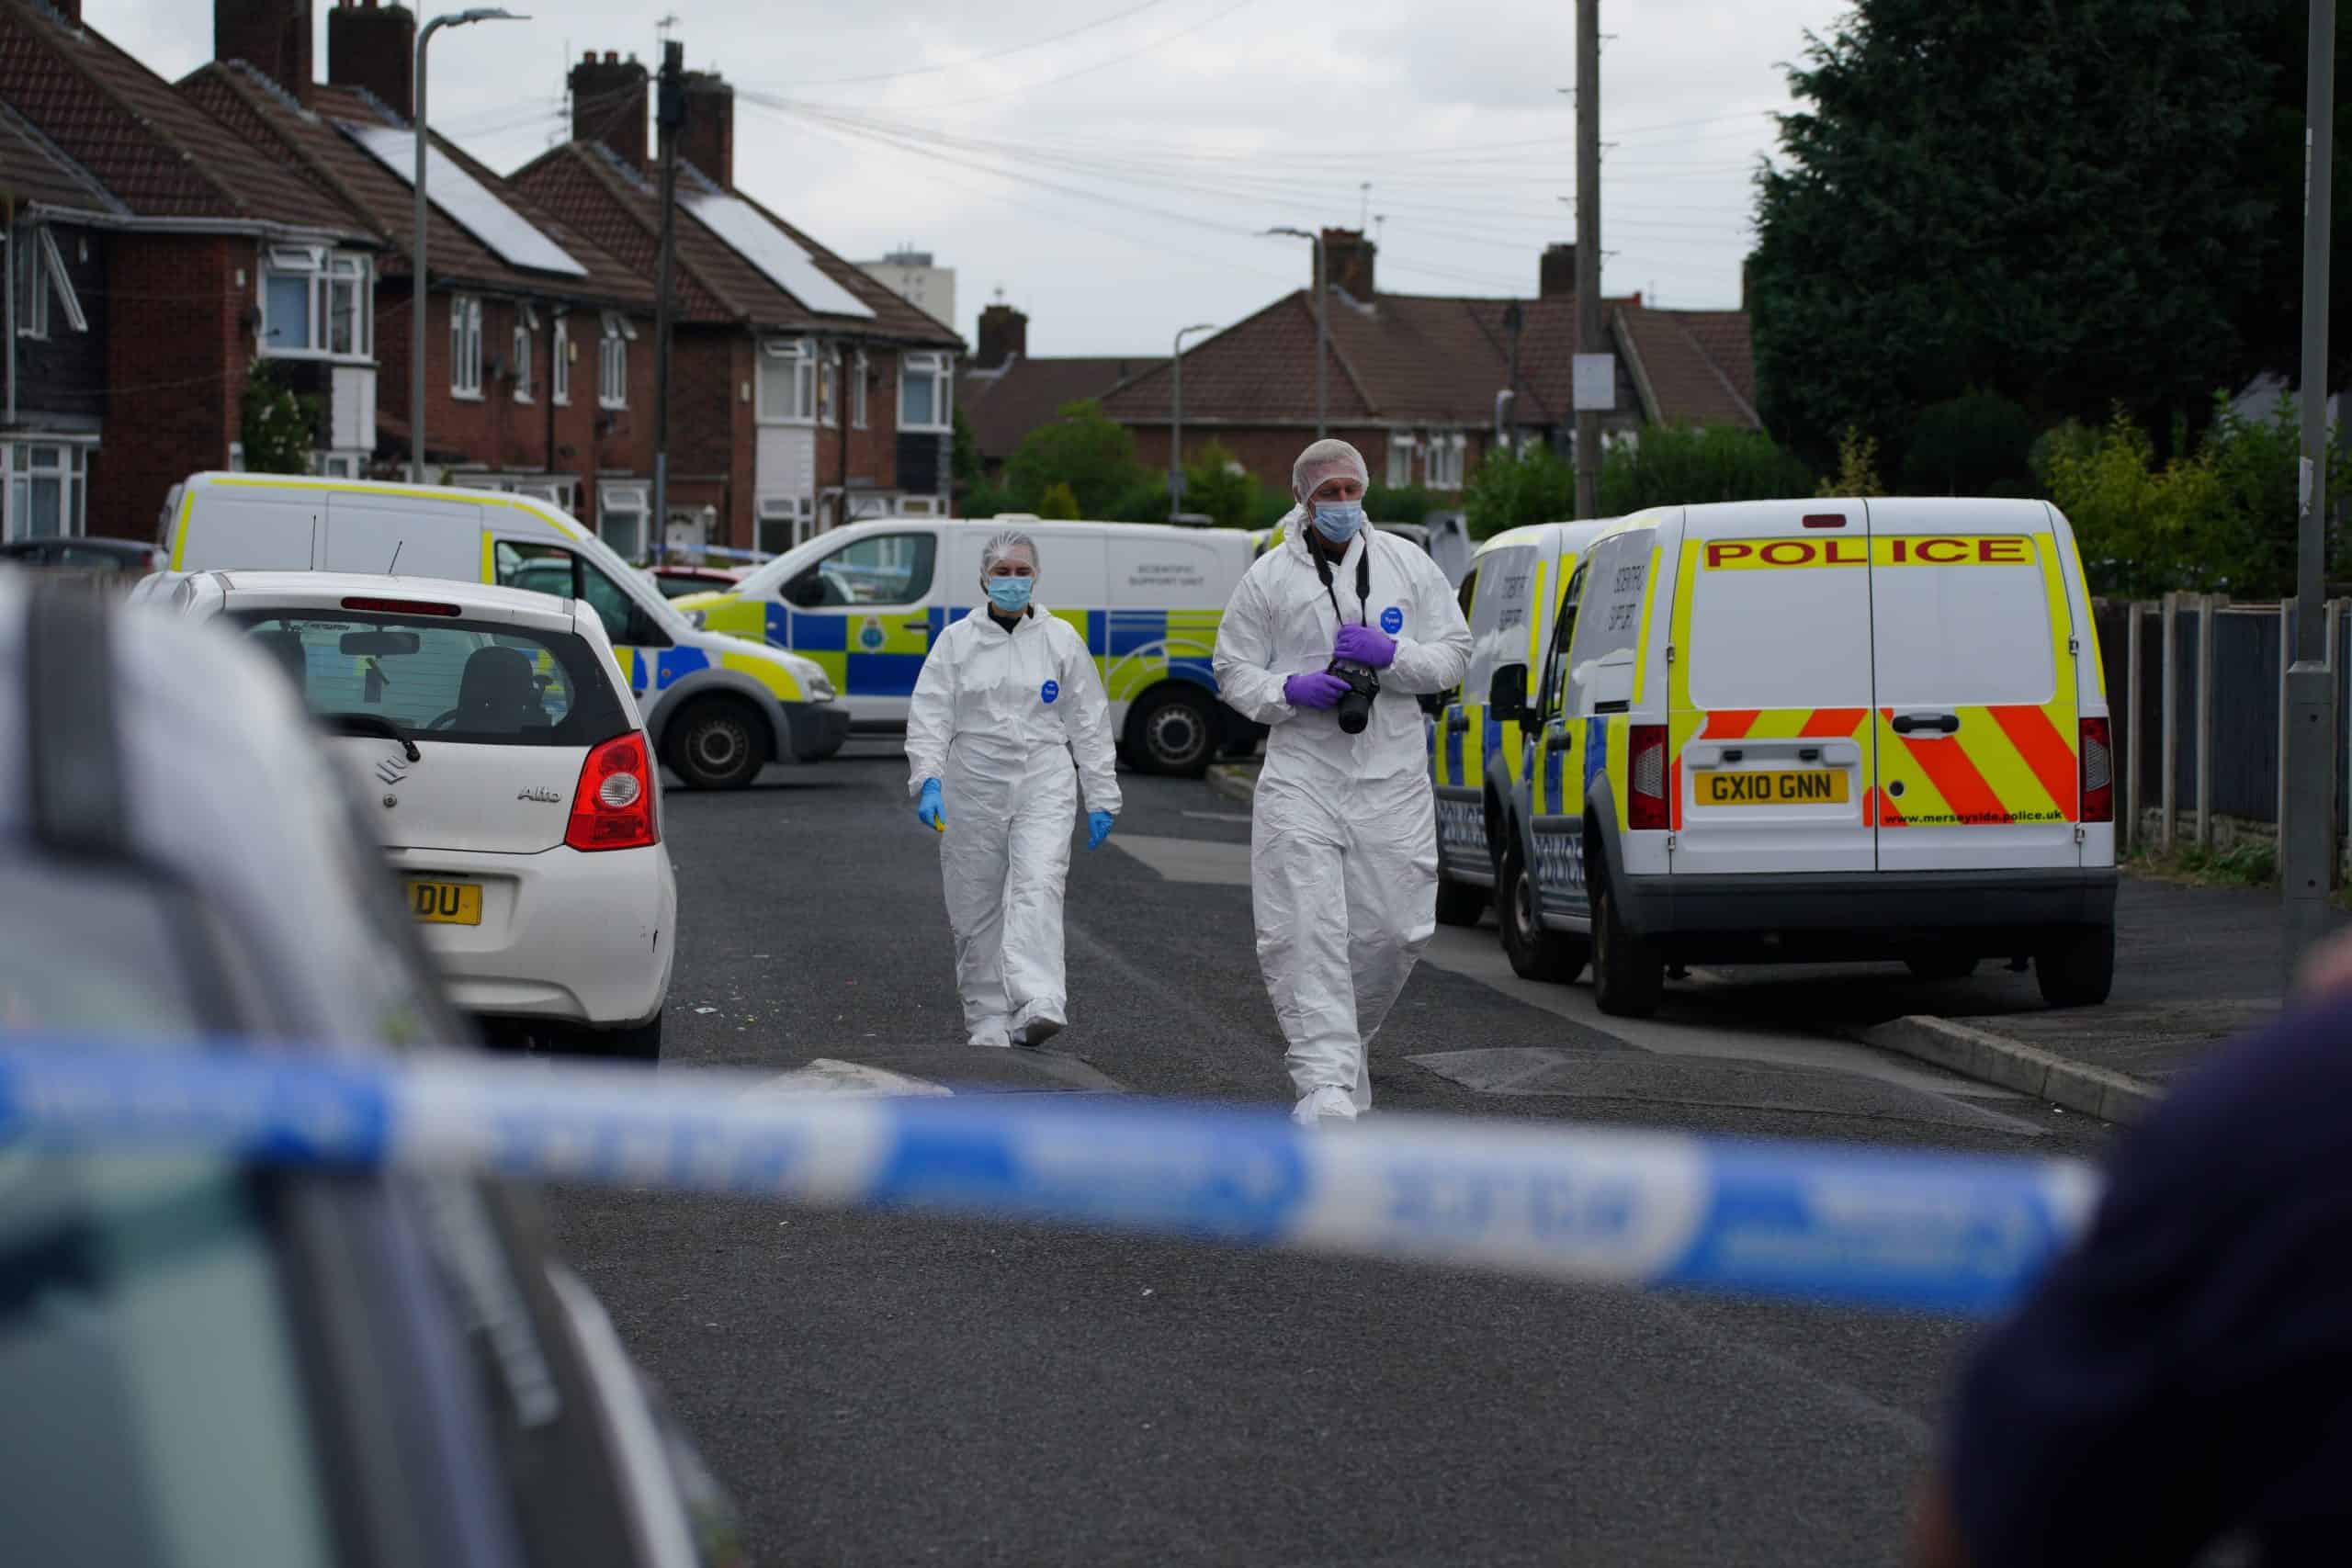 GB News broadcaster asks whether we should legalise guns – hours after nine-year-old girl is shot dead in Liverpool